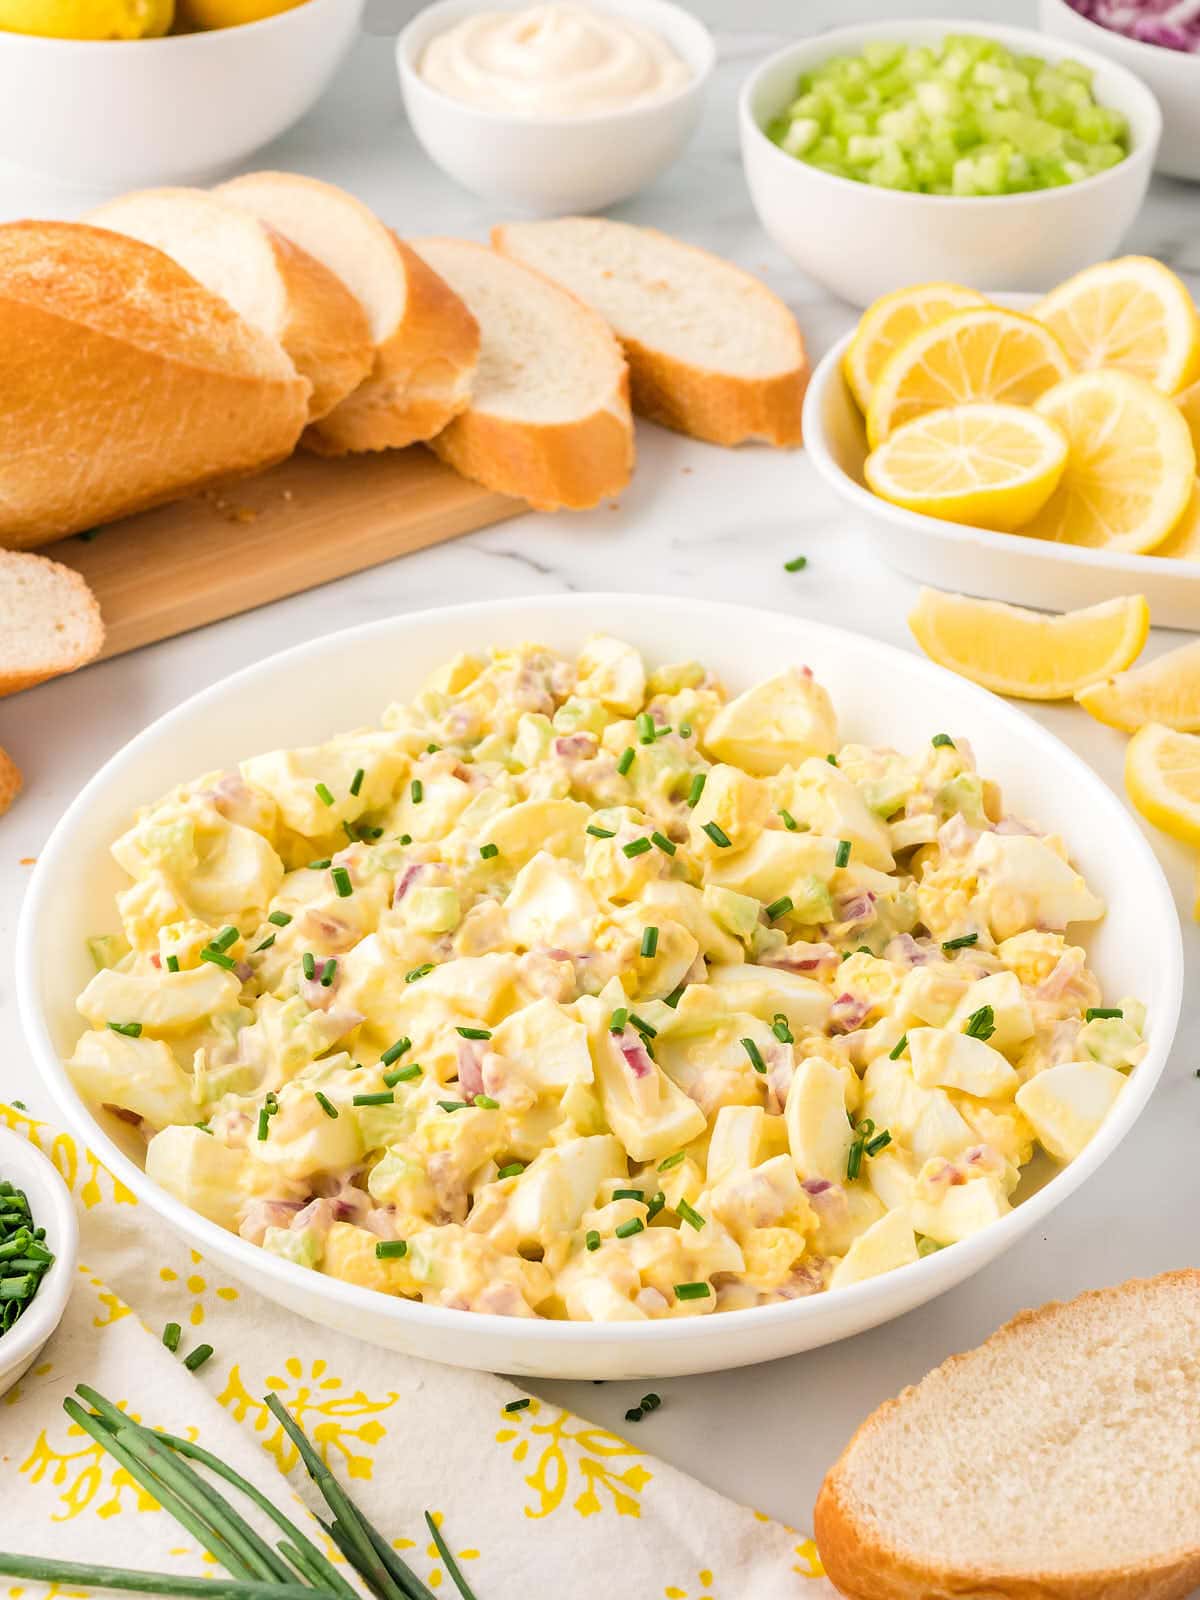 A bowl of potato salad with bread and lemons.